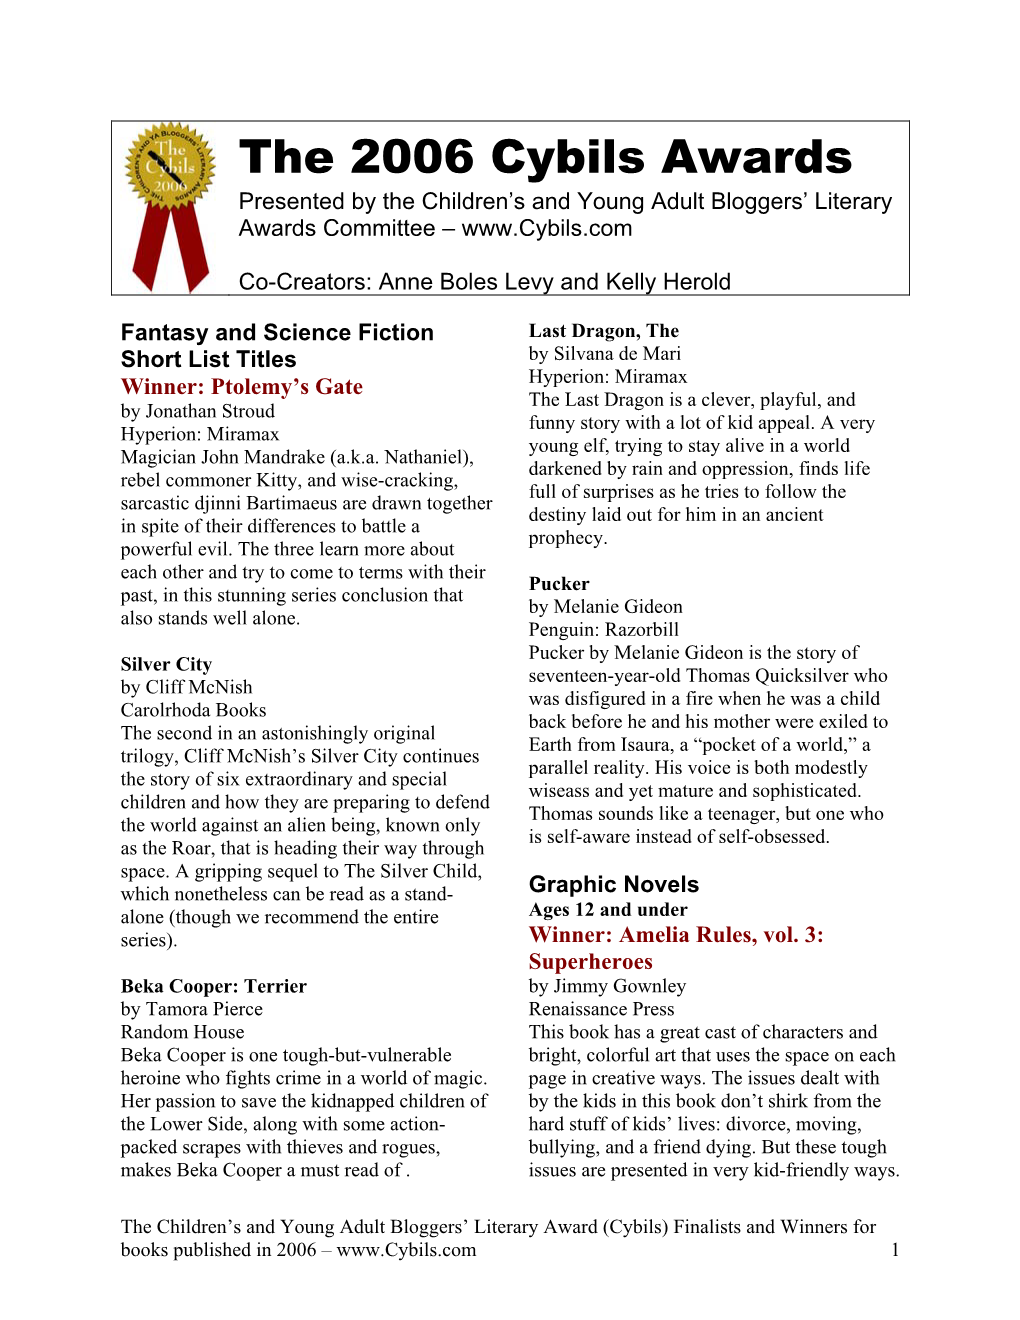 The 2006 Cybils Winners and Shortlists